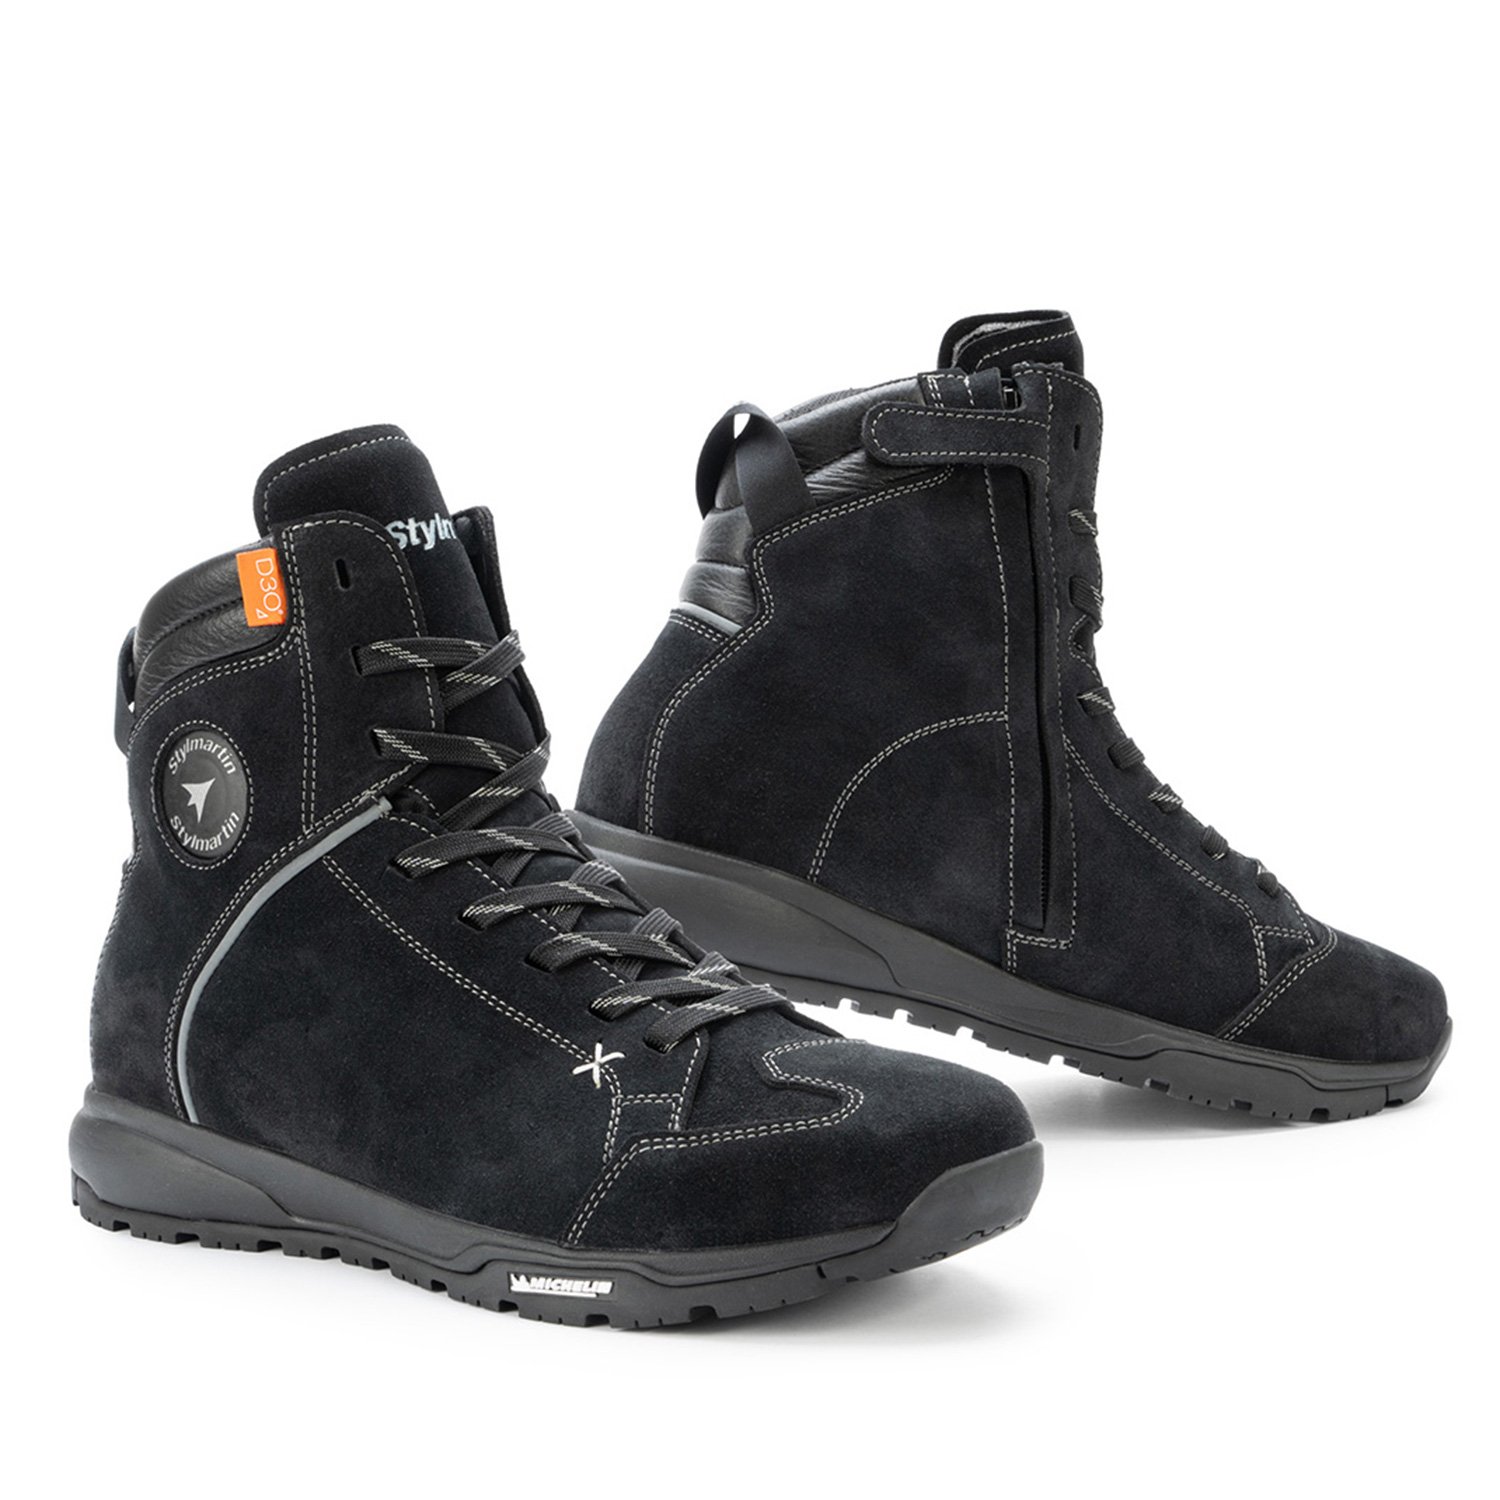 Image of Stylmartin Zed WP Sneakers Black Size 48 ID 1000001362502